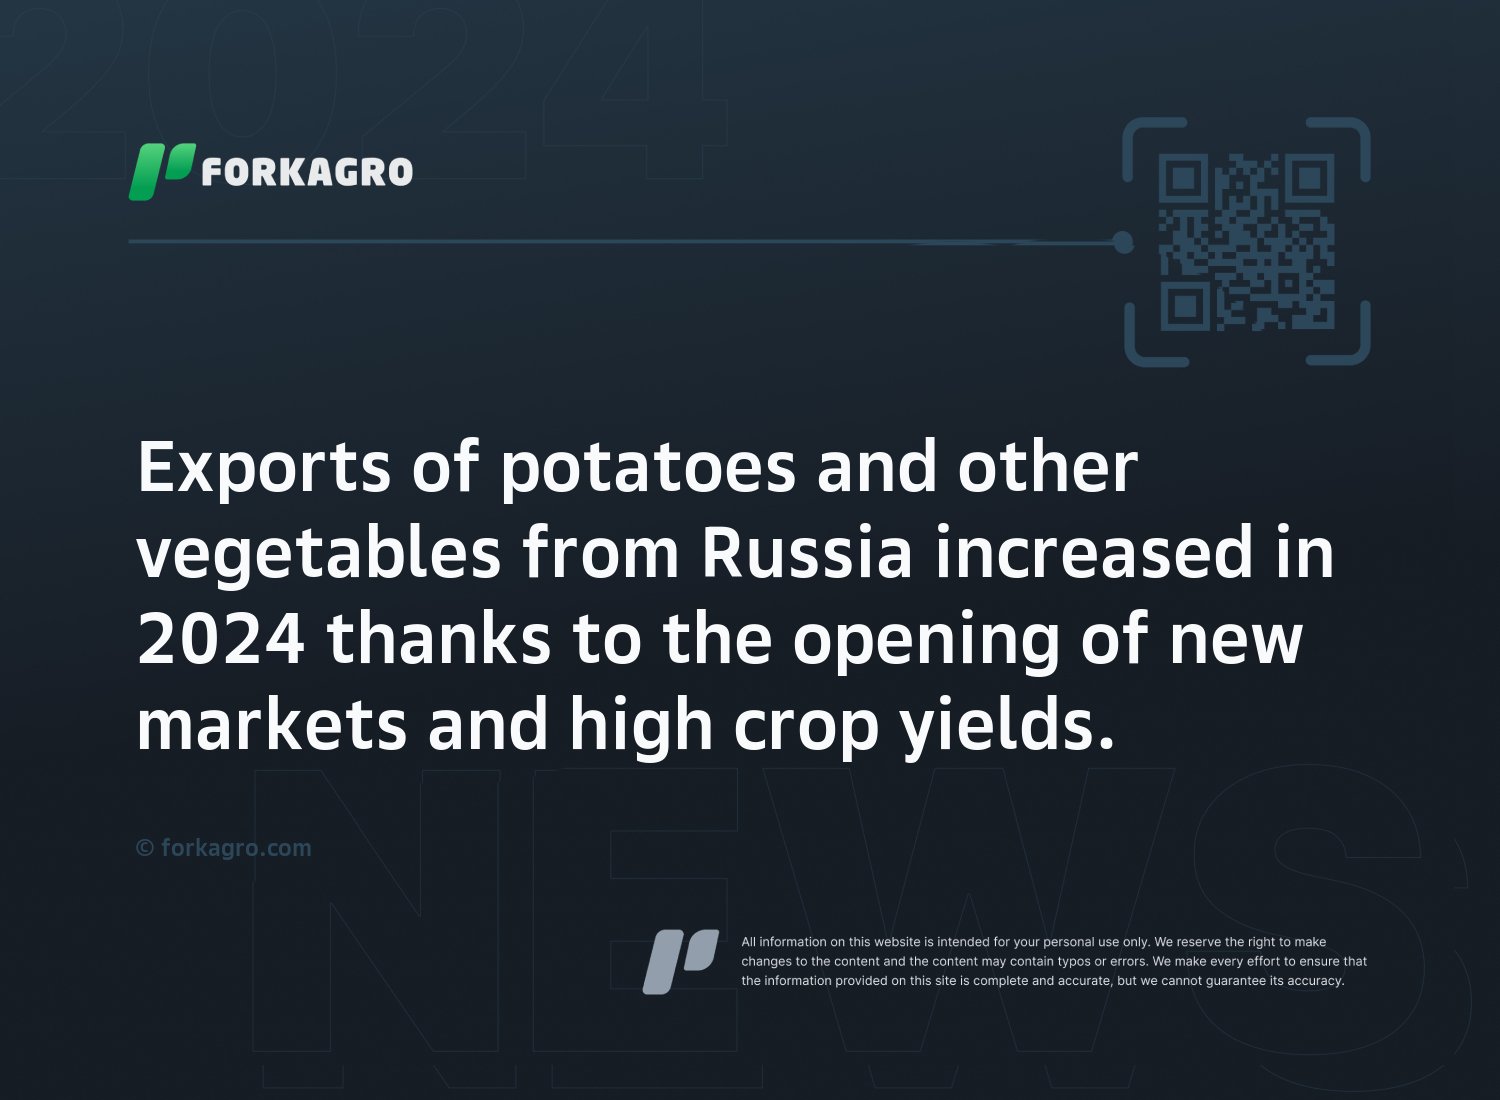 Exports of potatoes and other vegetables from Russia increased in 2024 thanks to the opening of new markets and high crop yields.